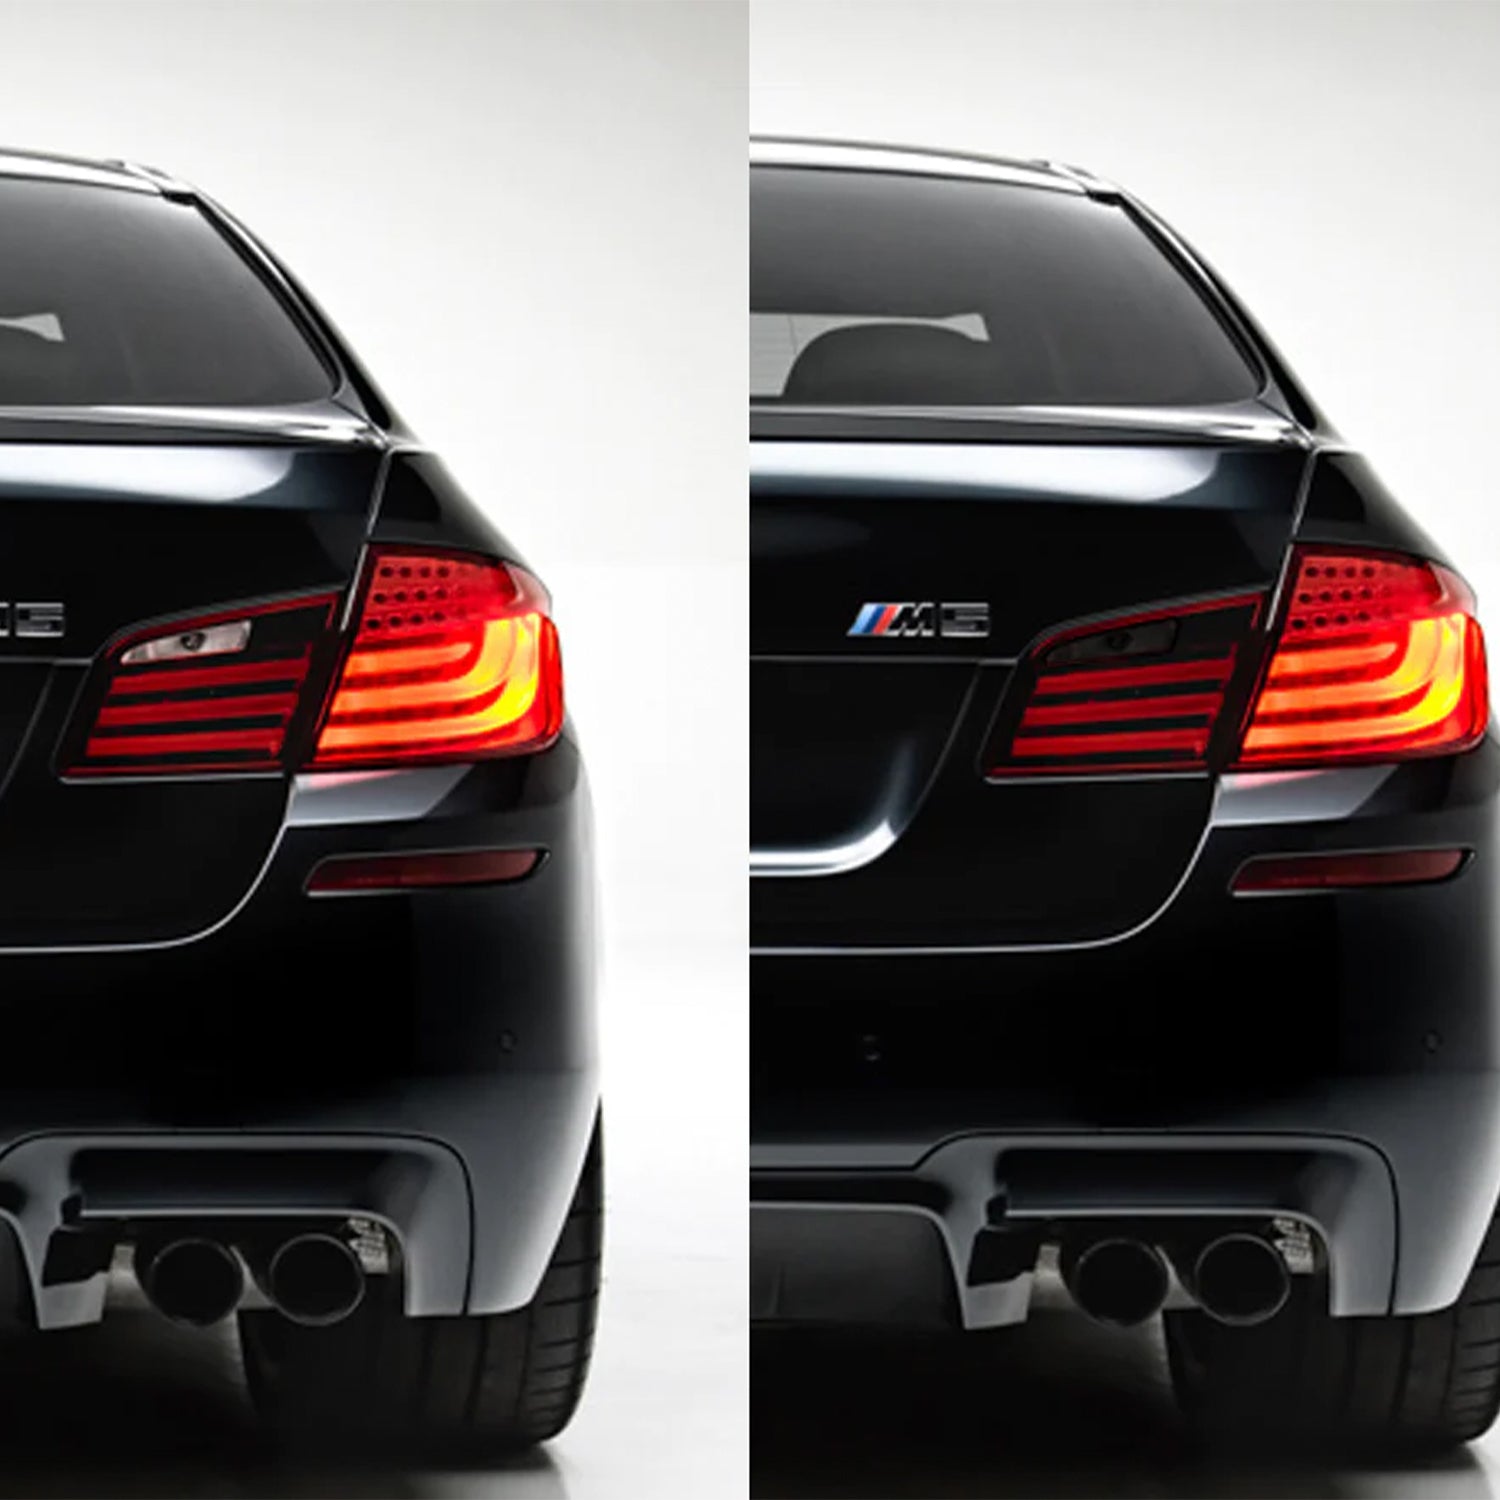 GoldenWrench BMW F10 M5 F10 5 Series Taillight Overlay Kit Before & After